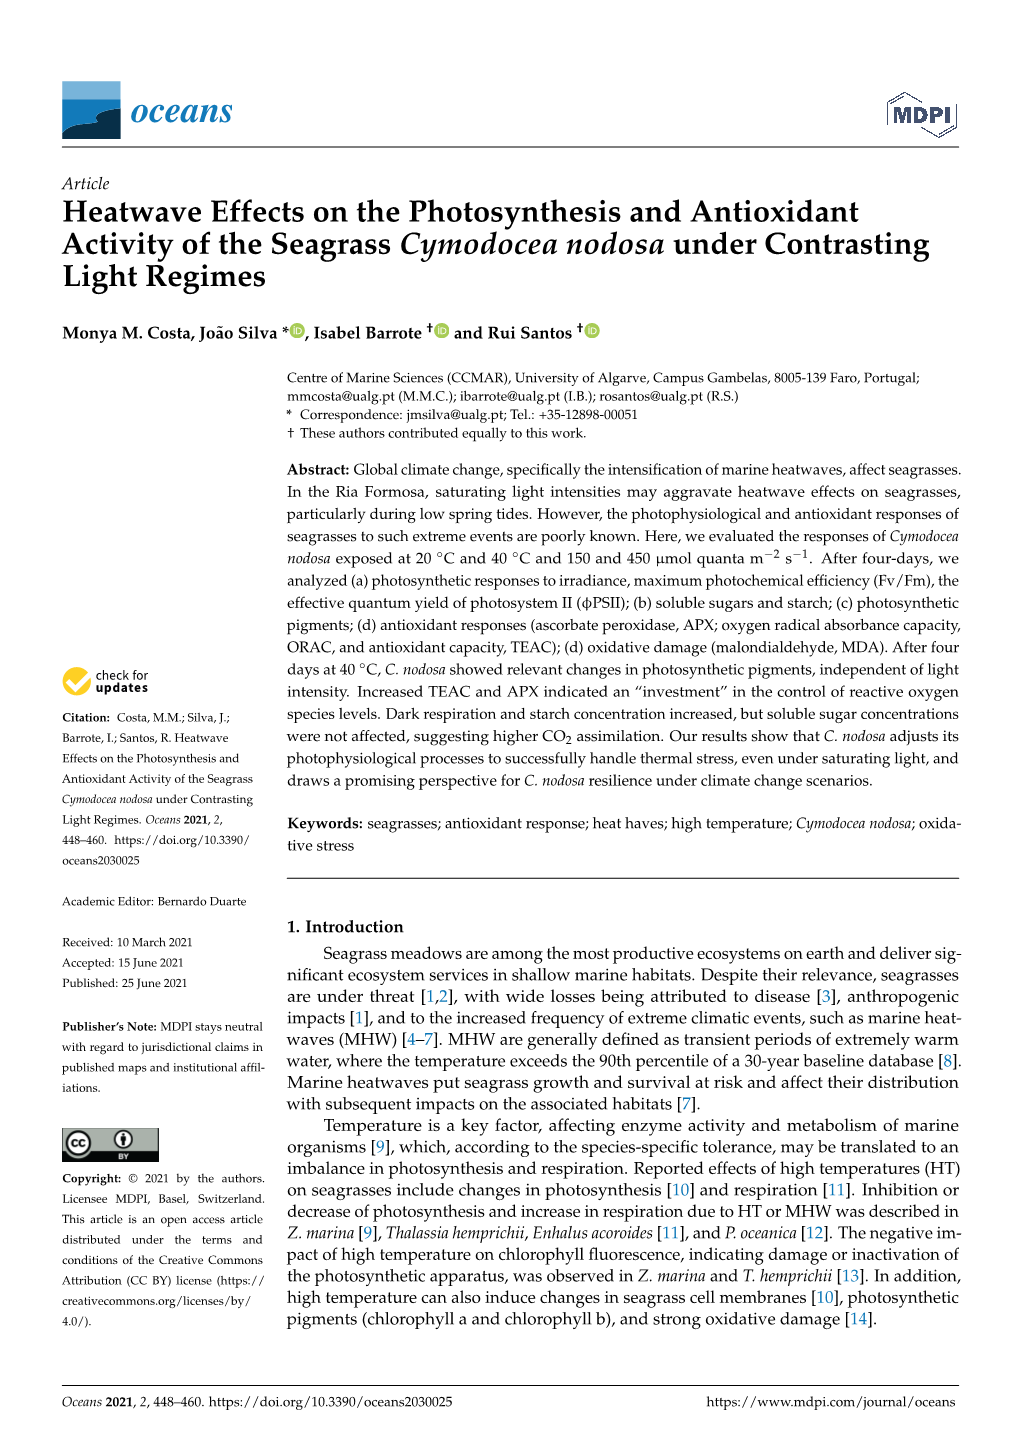 Heatwave Effects on the Photosynthesis and Antioxidant Activity of the Seagrass Cymodocea Nodosa Under Contrasting Light Regimes